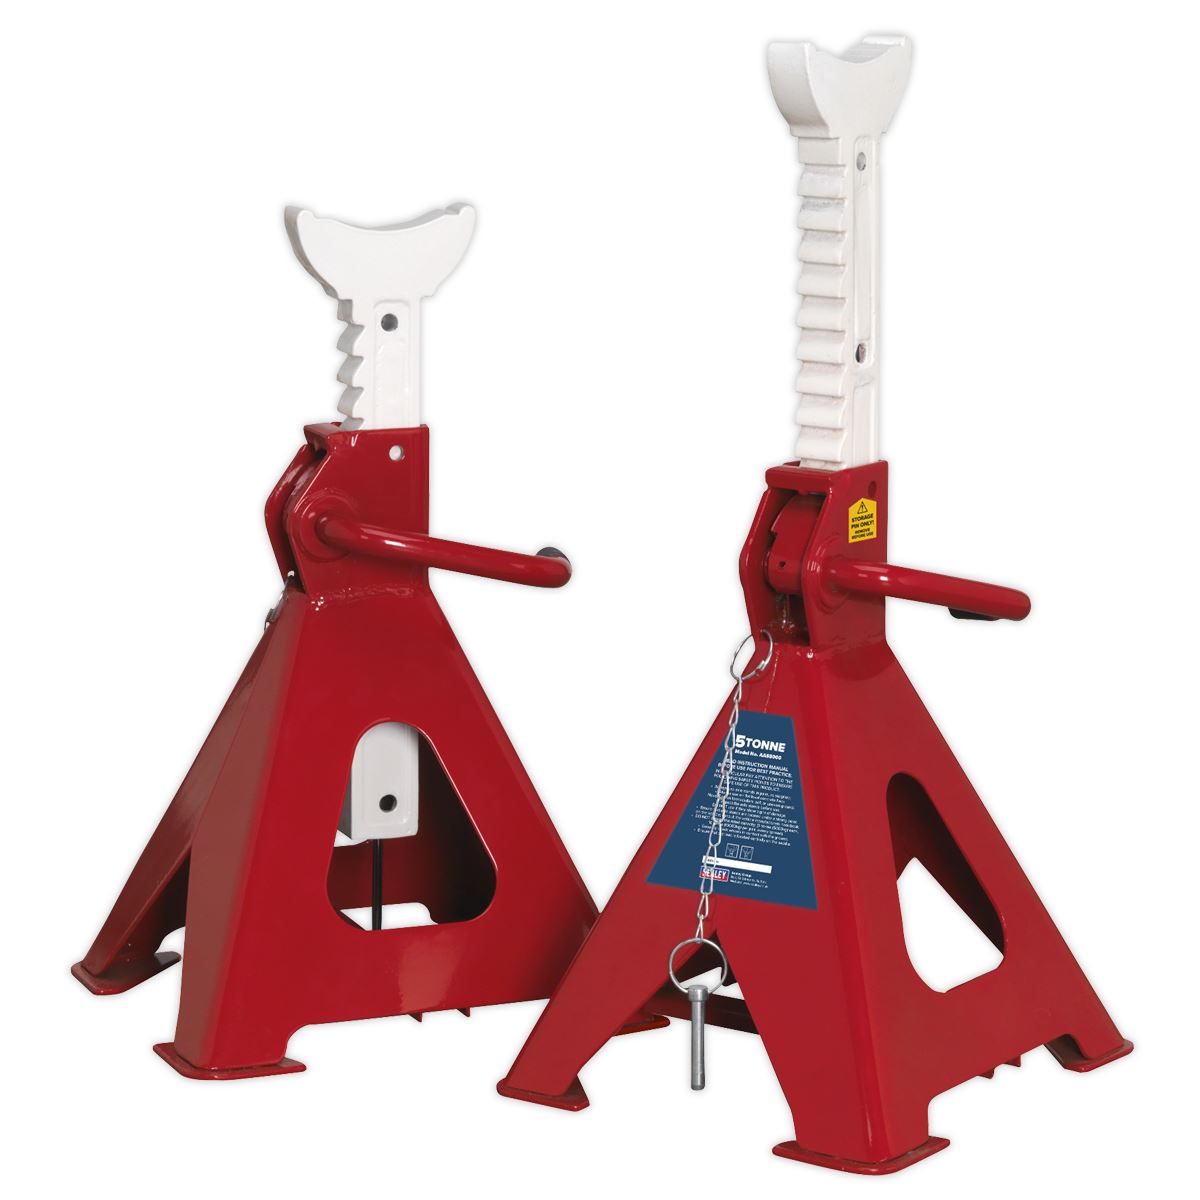 Sealey Auto Rise Ratchet Axle Stands (Pair) 5 Tonne Capacity per Stand